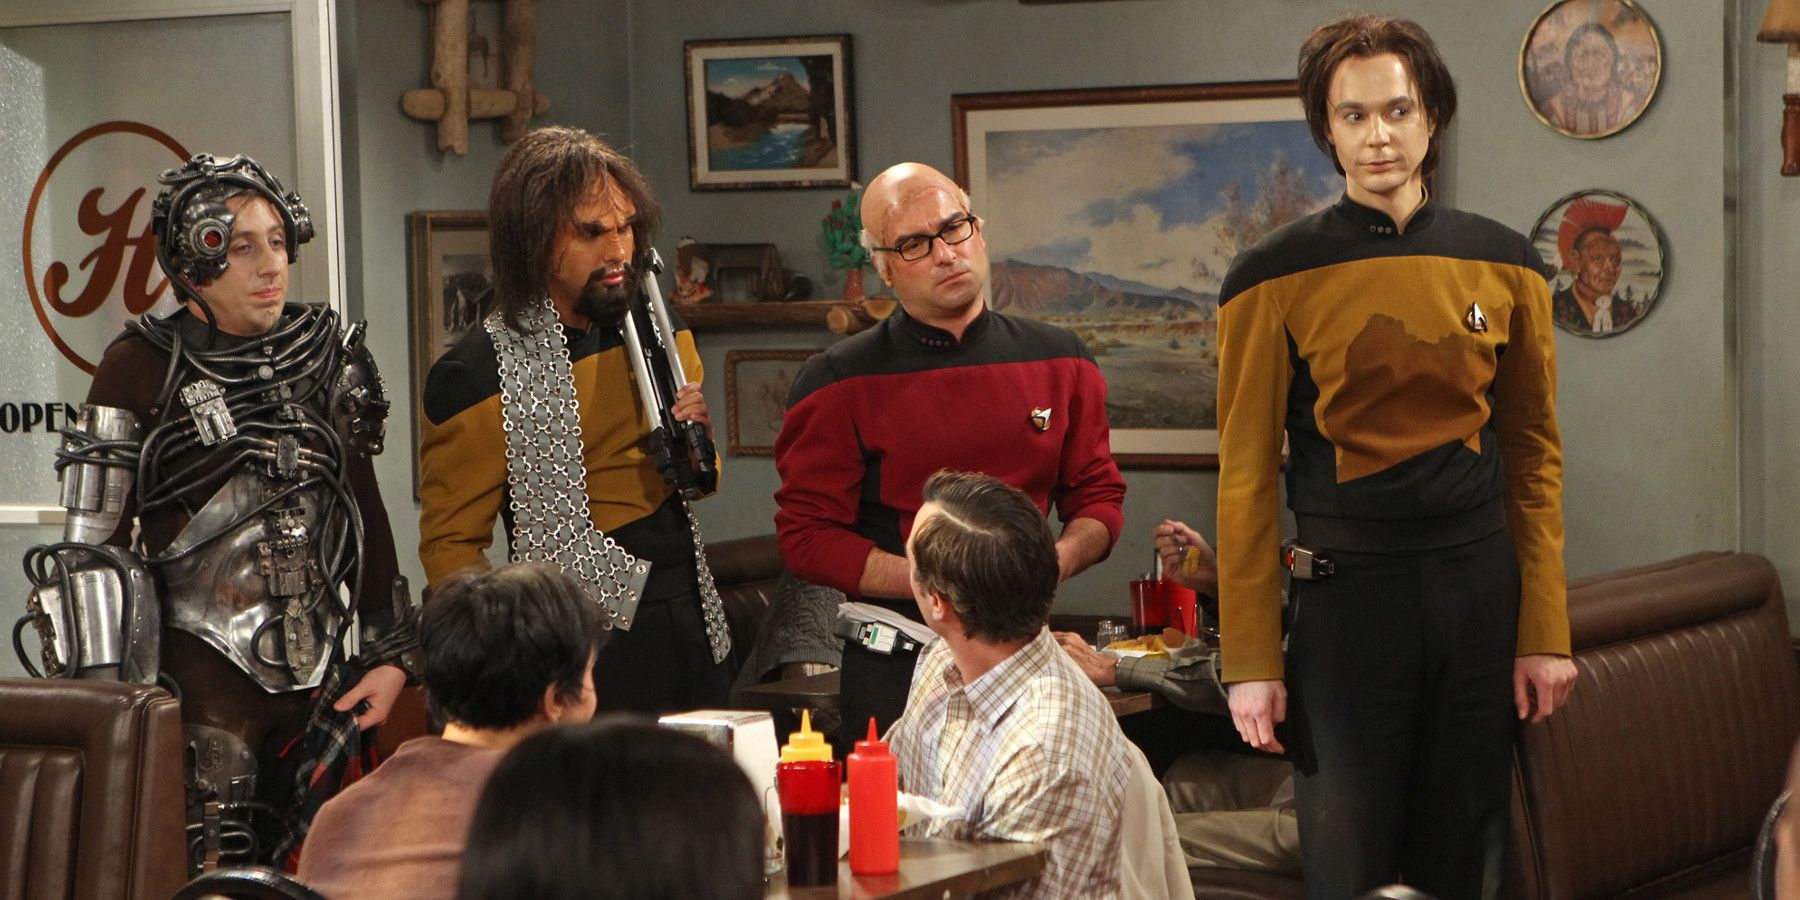 The Big Bang Theory Cast Dressed As Star Trek The Next Generation